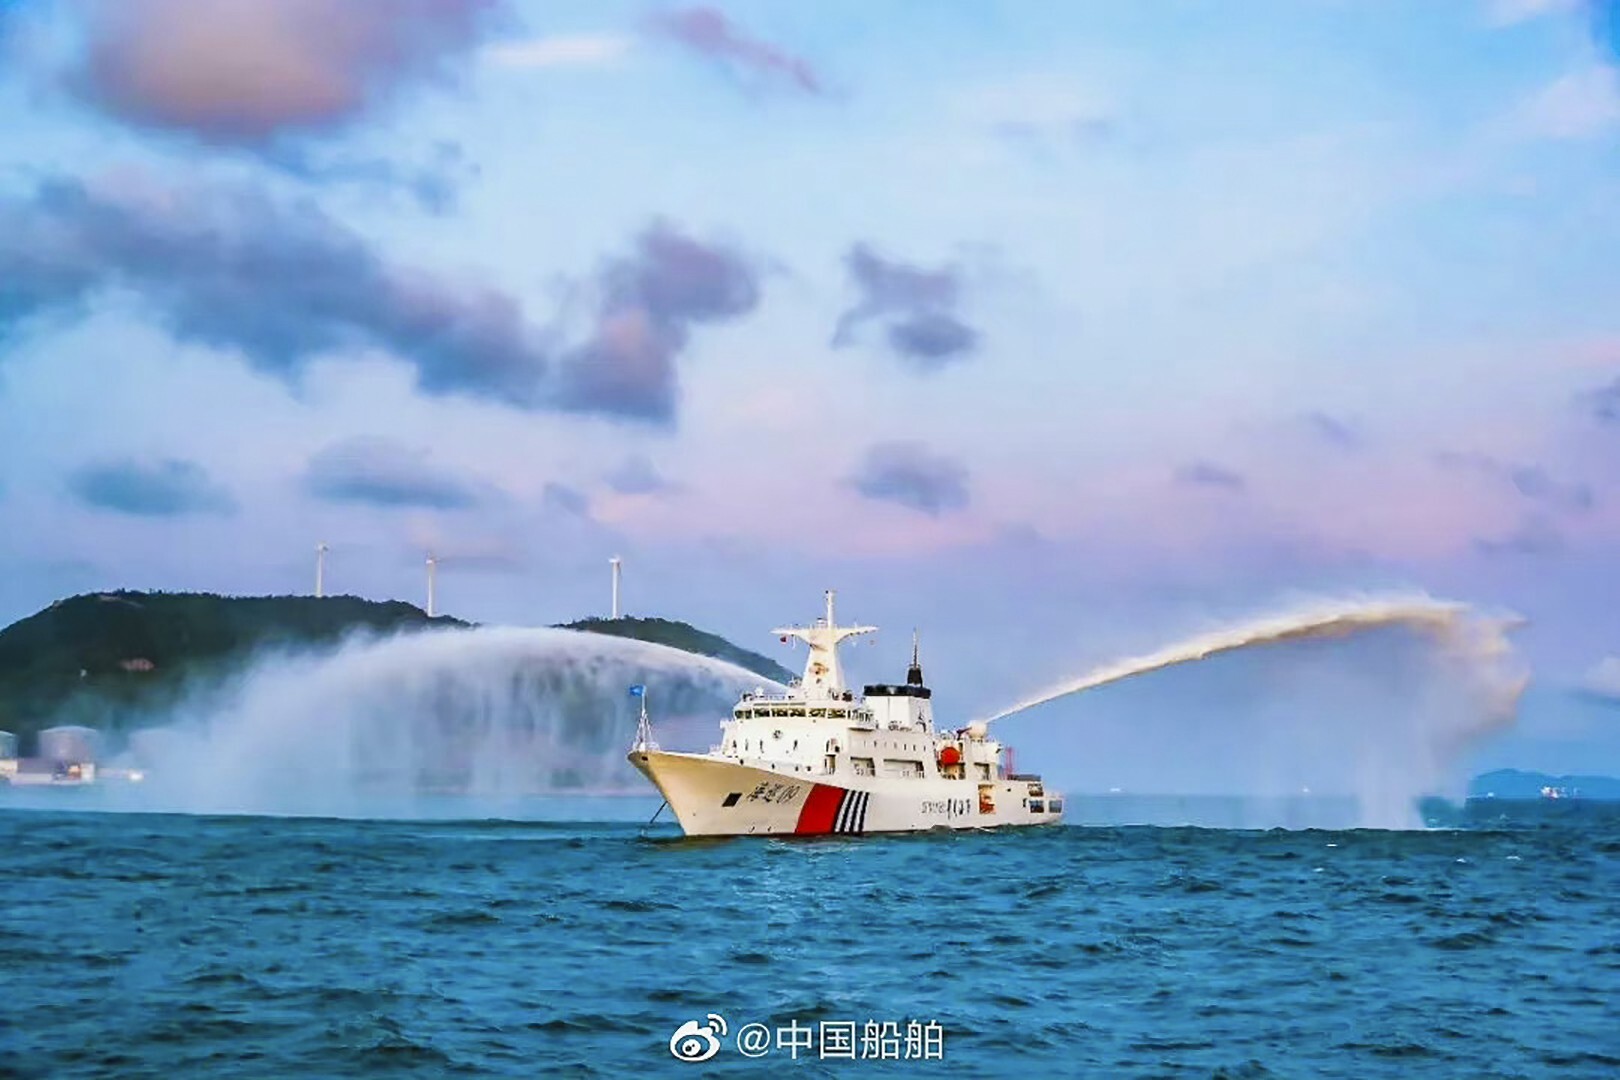 The vessel can be used for search and rescue operations. Photo: Weibo